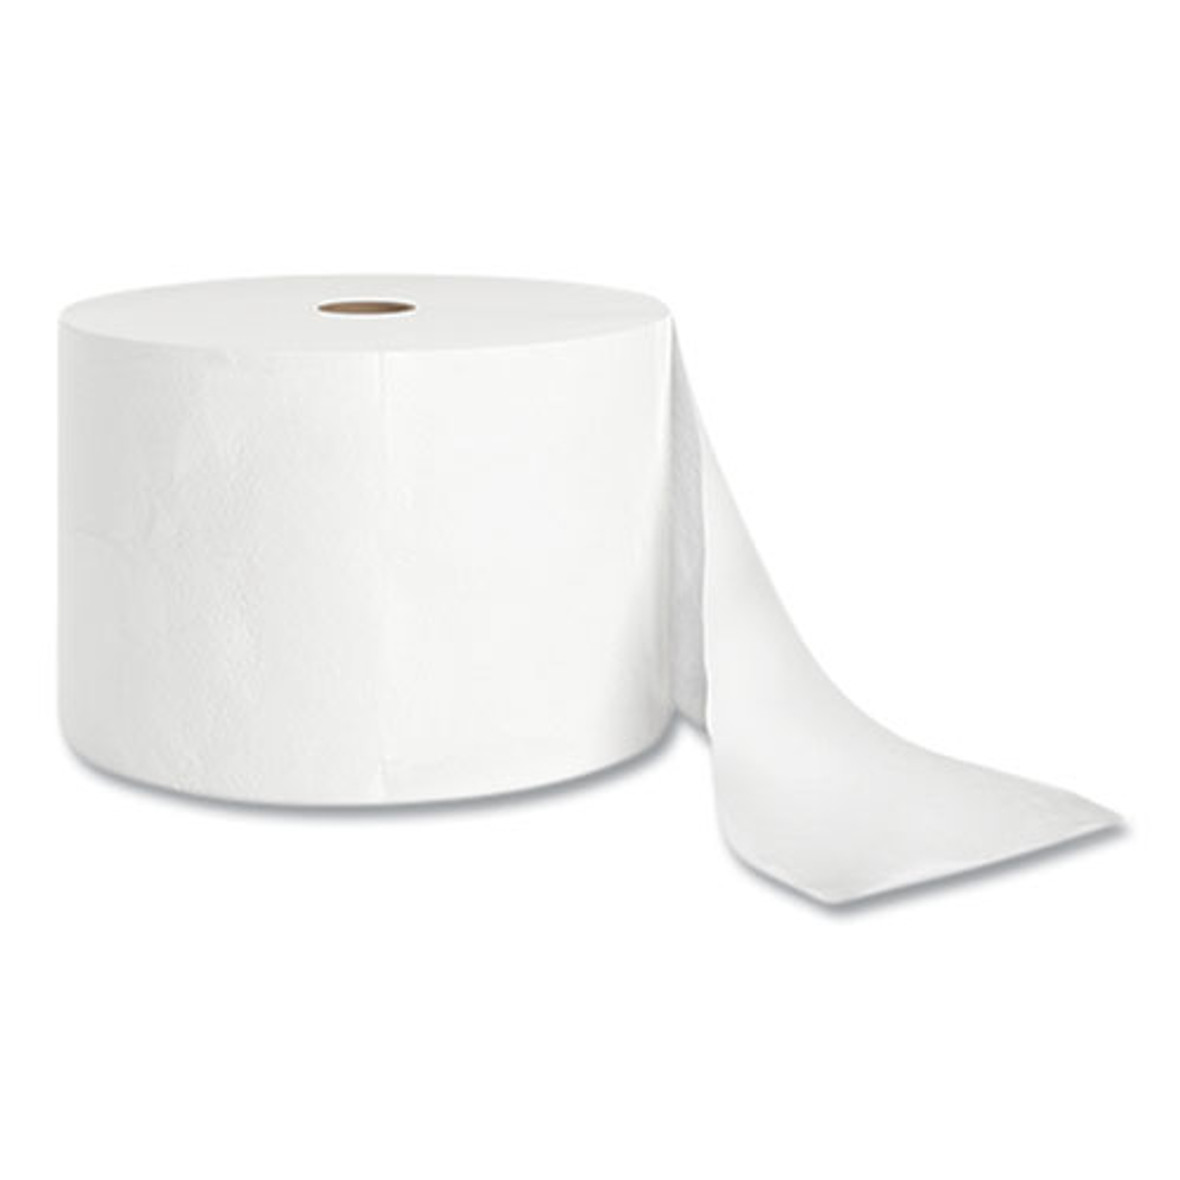 Coastwide J-Series Two-Ply Small Core Bath Tissue, Septic Safe, White, 4 x 4, 1,500 Sheets/Roll, 18 Rls/Ctn